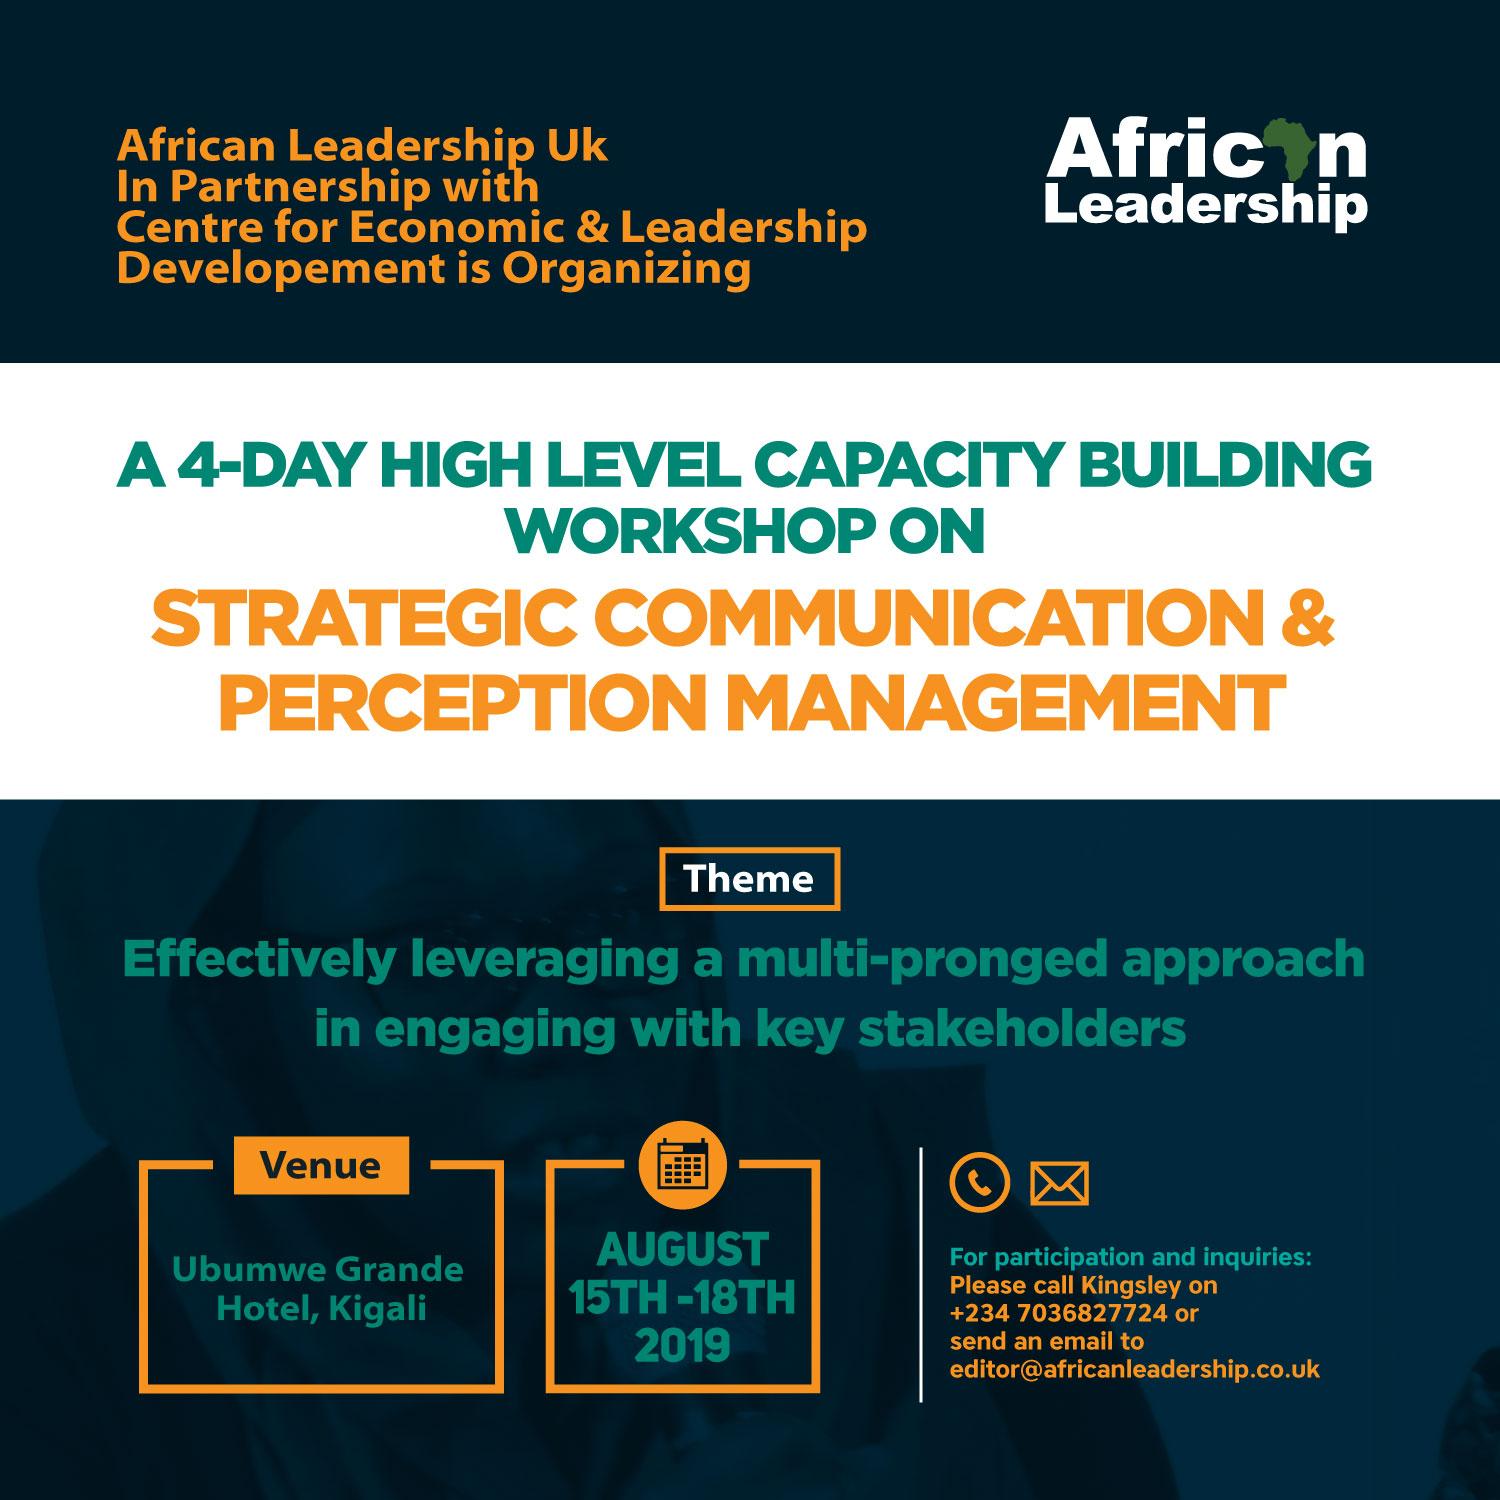 African Leadership To Organize A Strategic Communication & Perception Management Workshop For Pr Managers In Kigali